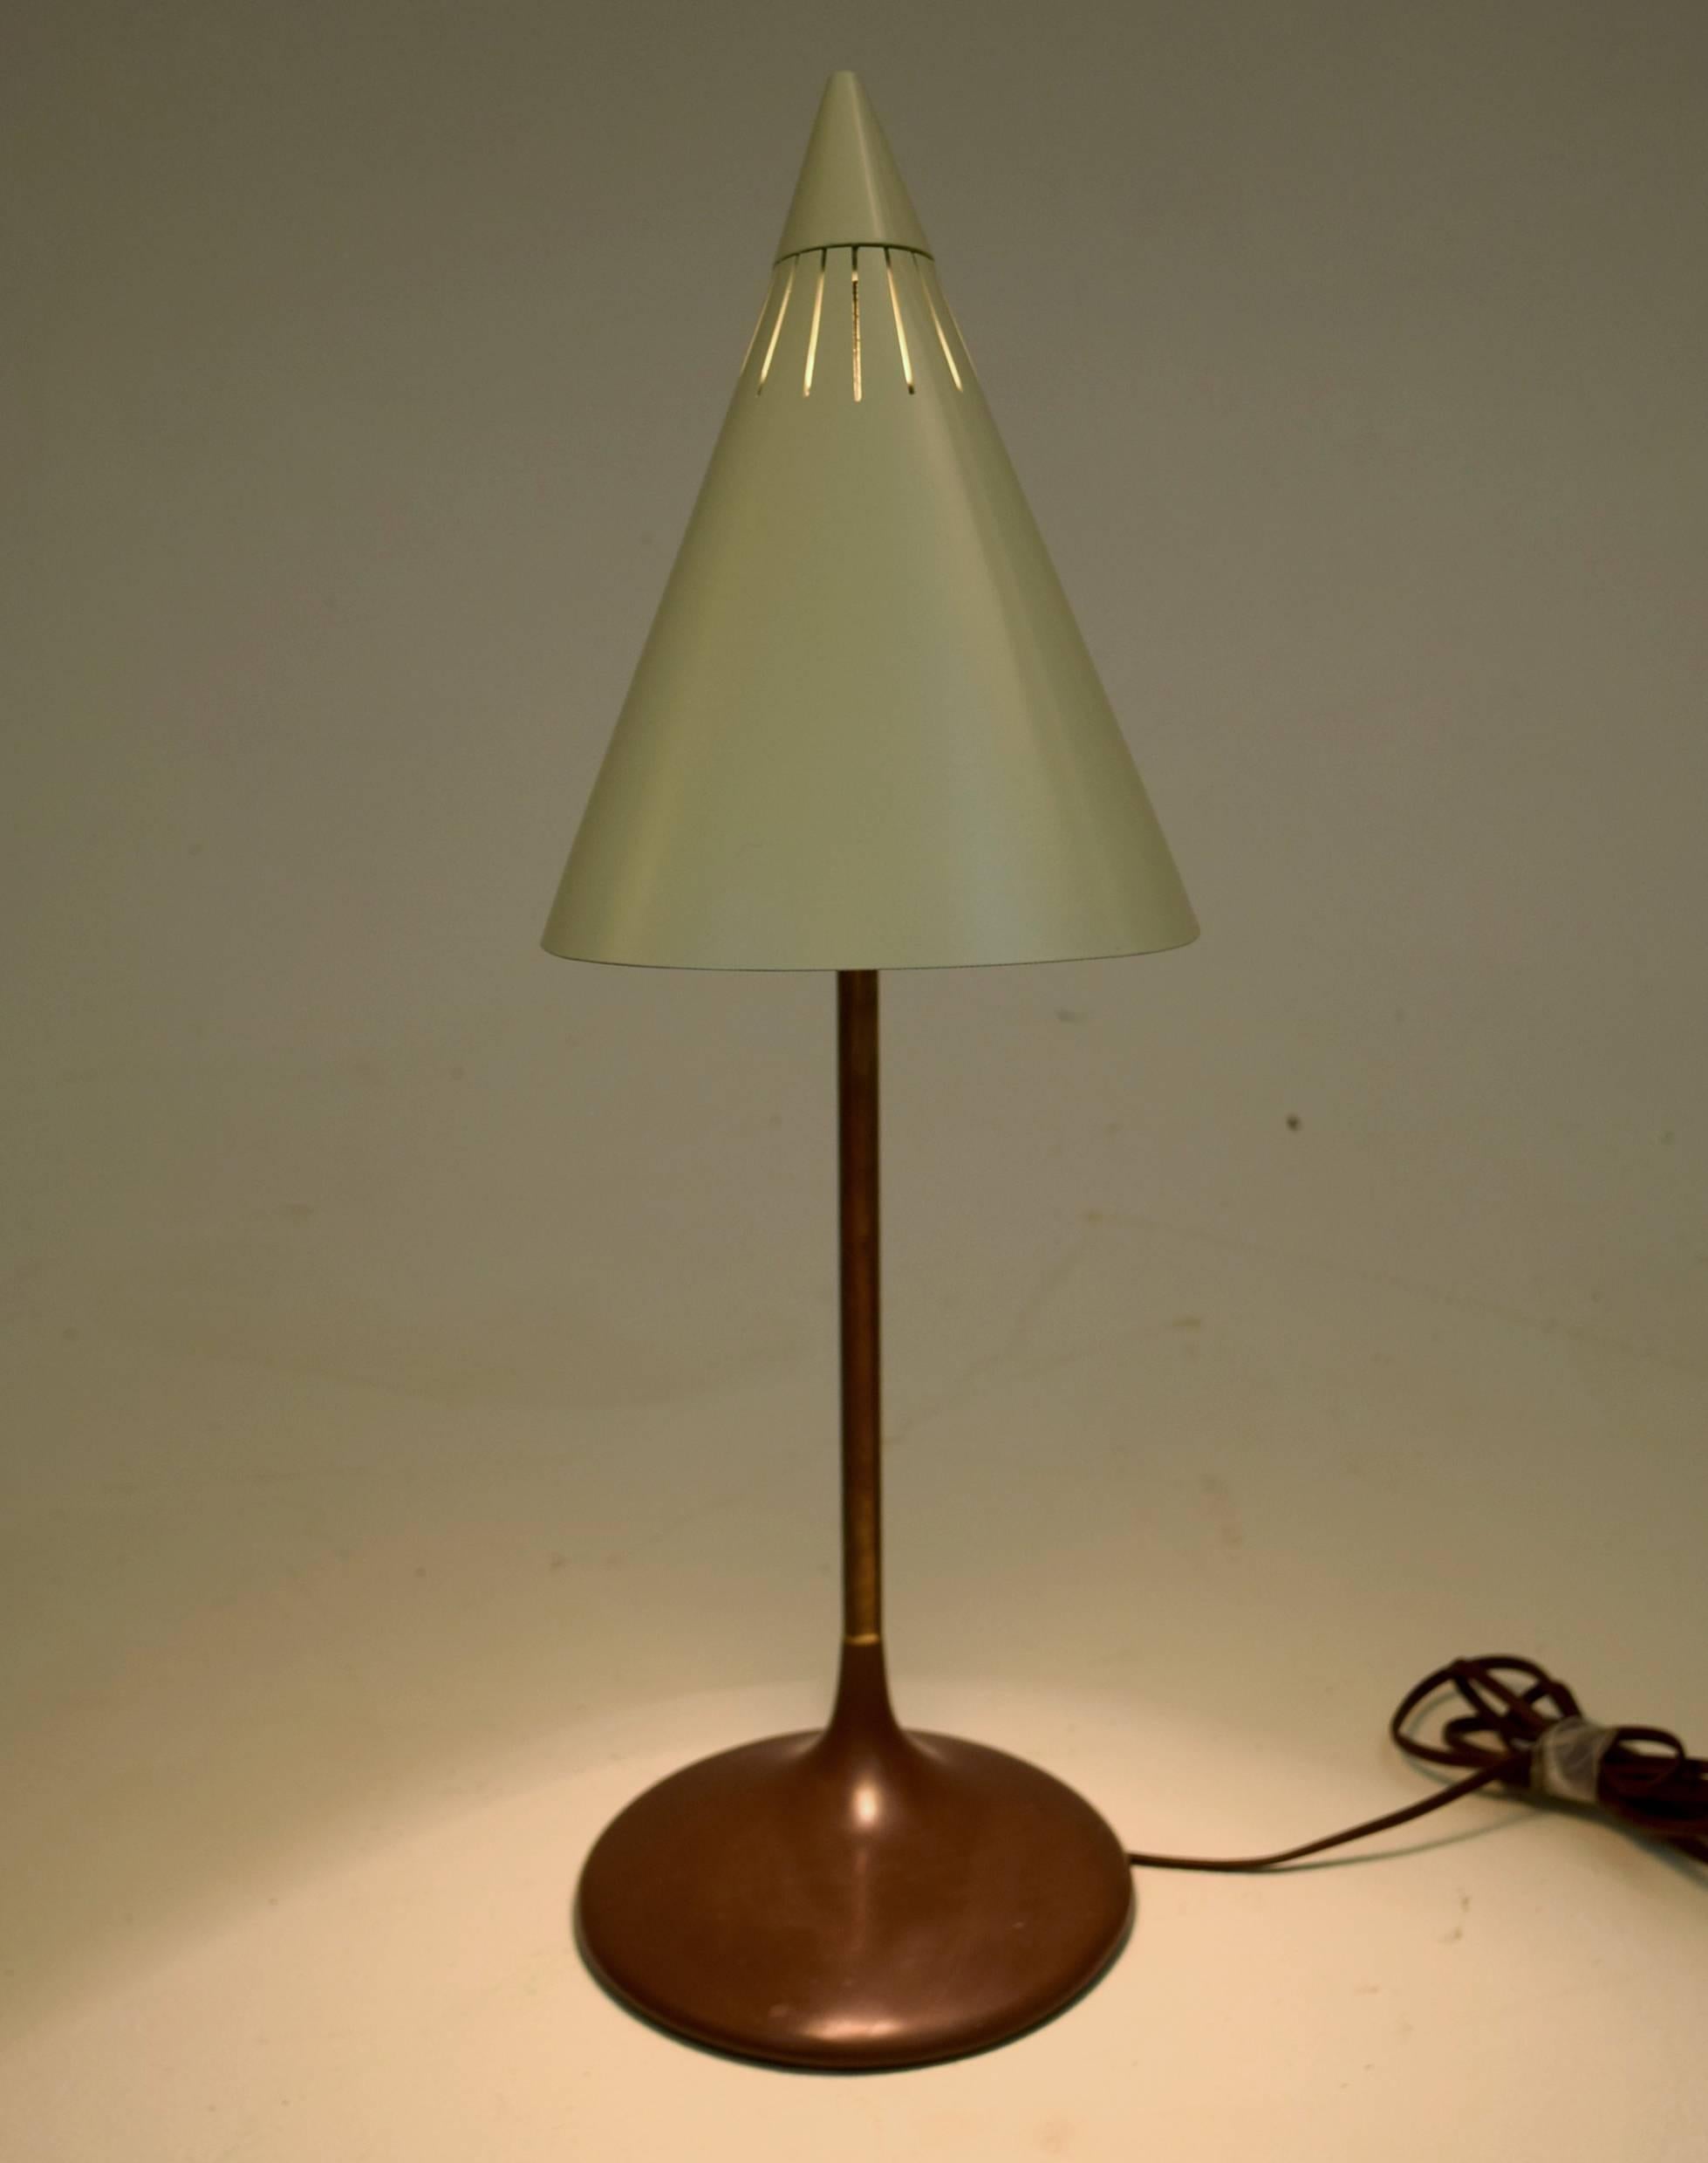 American Modernist Table or Desk Lamp by Lightolier with Triangular Shade